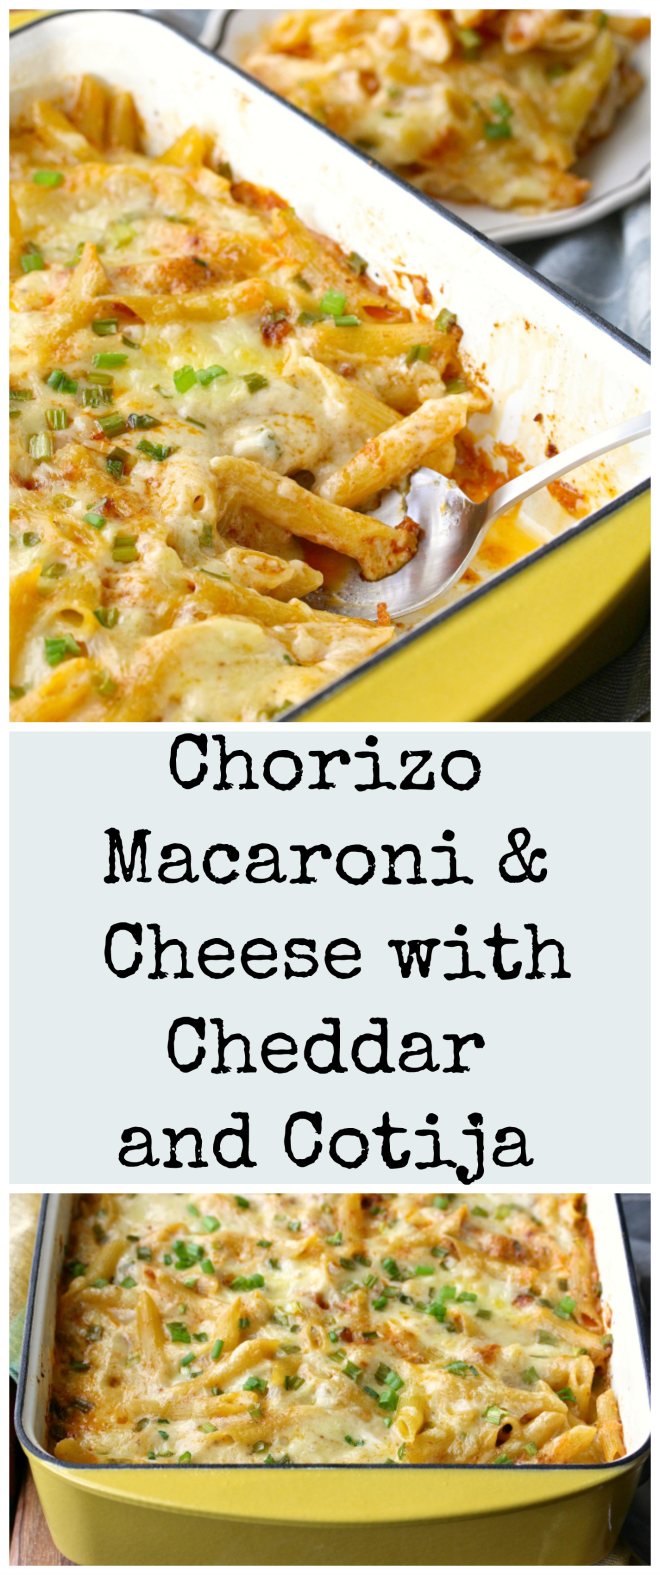 This Chorizo Macaroni and Cheese with Cheddar and Cotija takes the flavors of English and Mexican cheeses and combines them into about the best macaroni and cheese I've ever tried. 